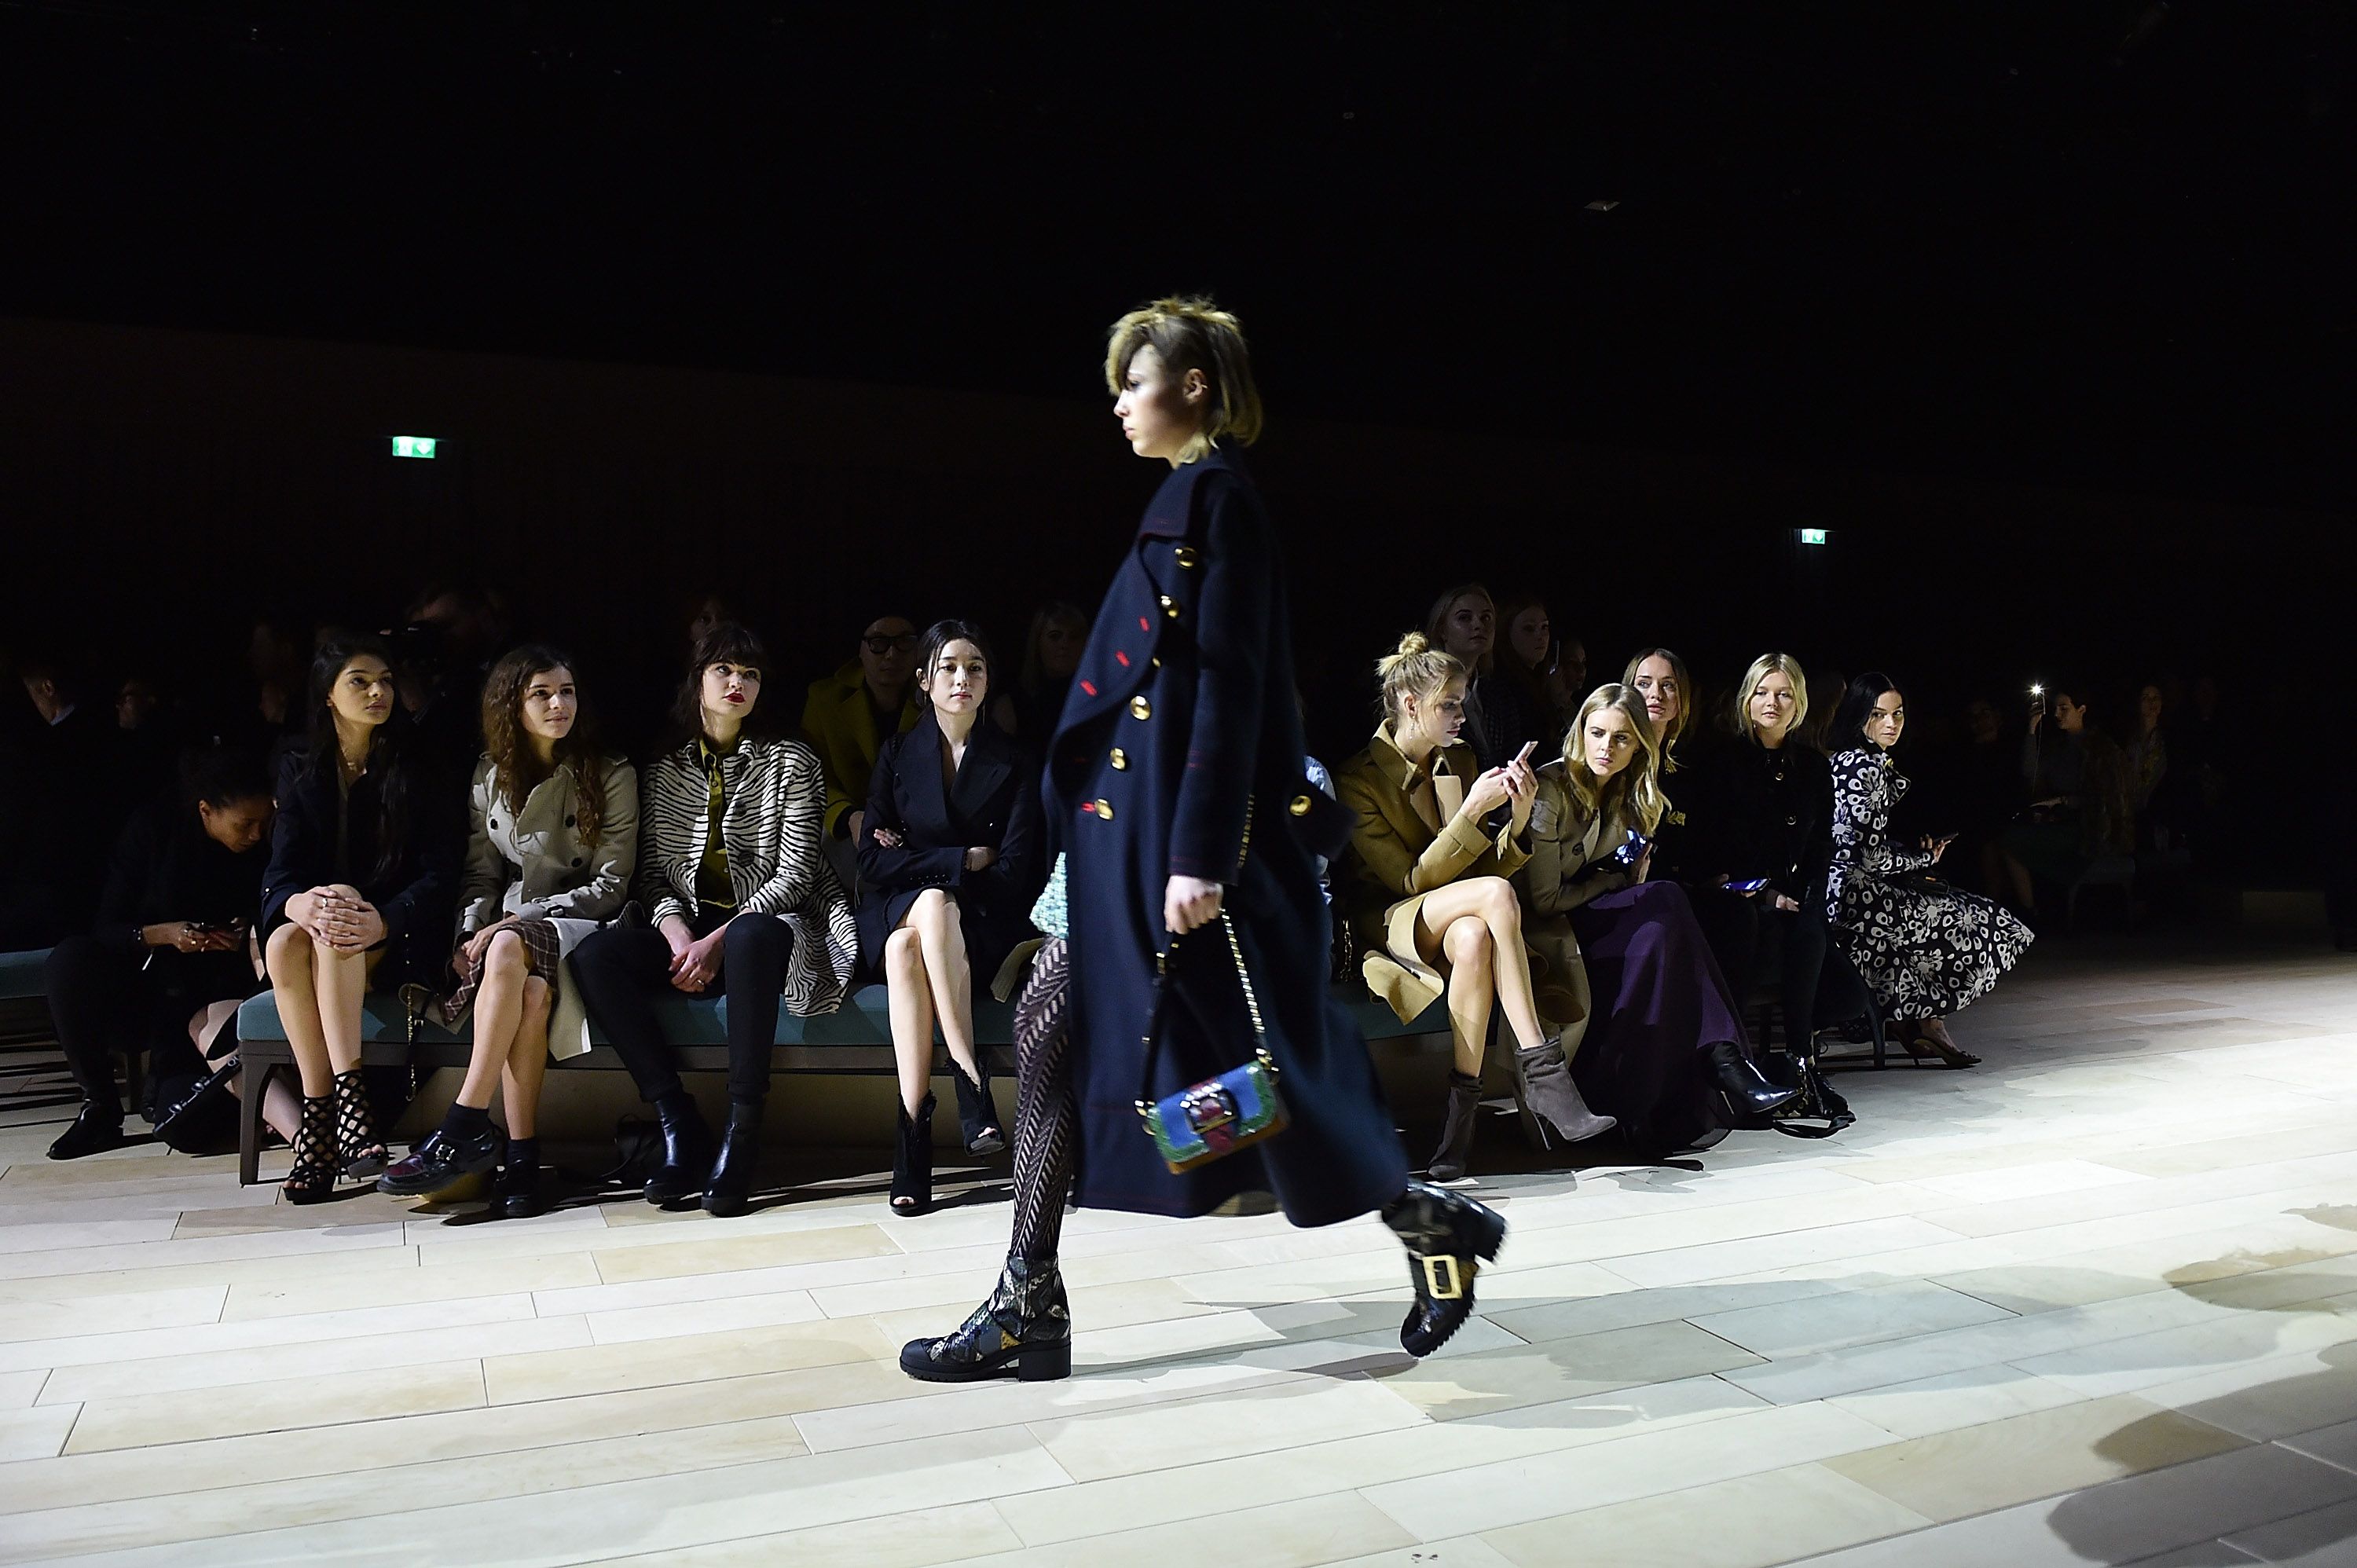 Burberry to sell fashion collections straight from the catwalk